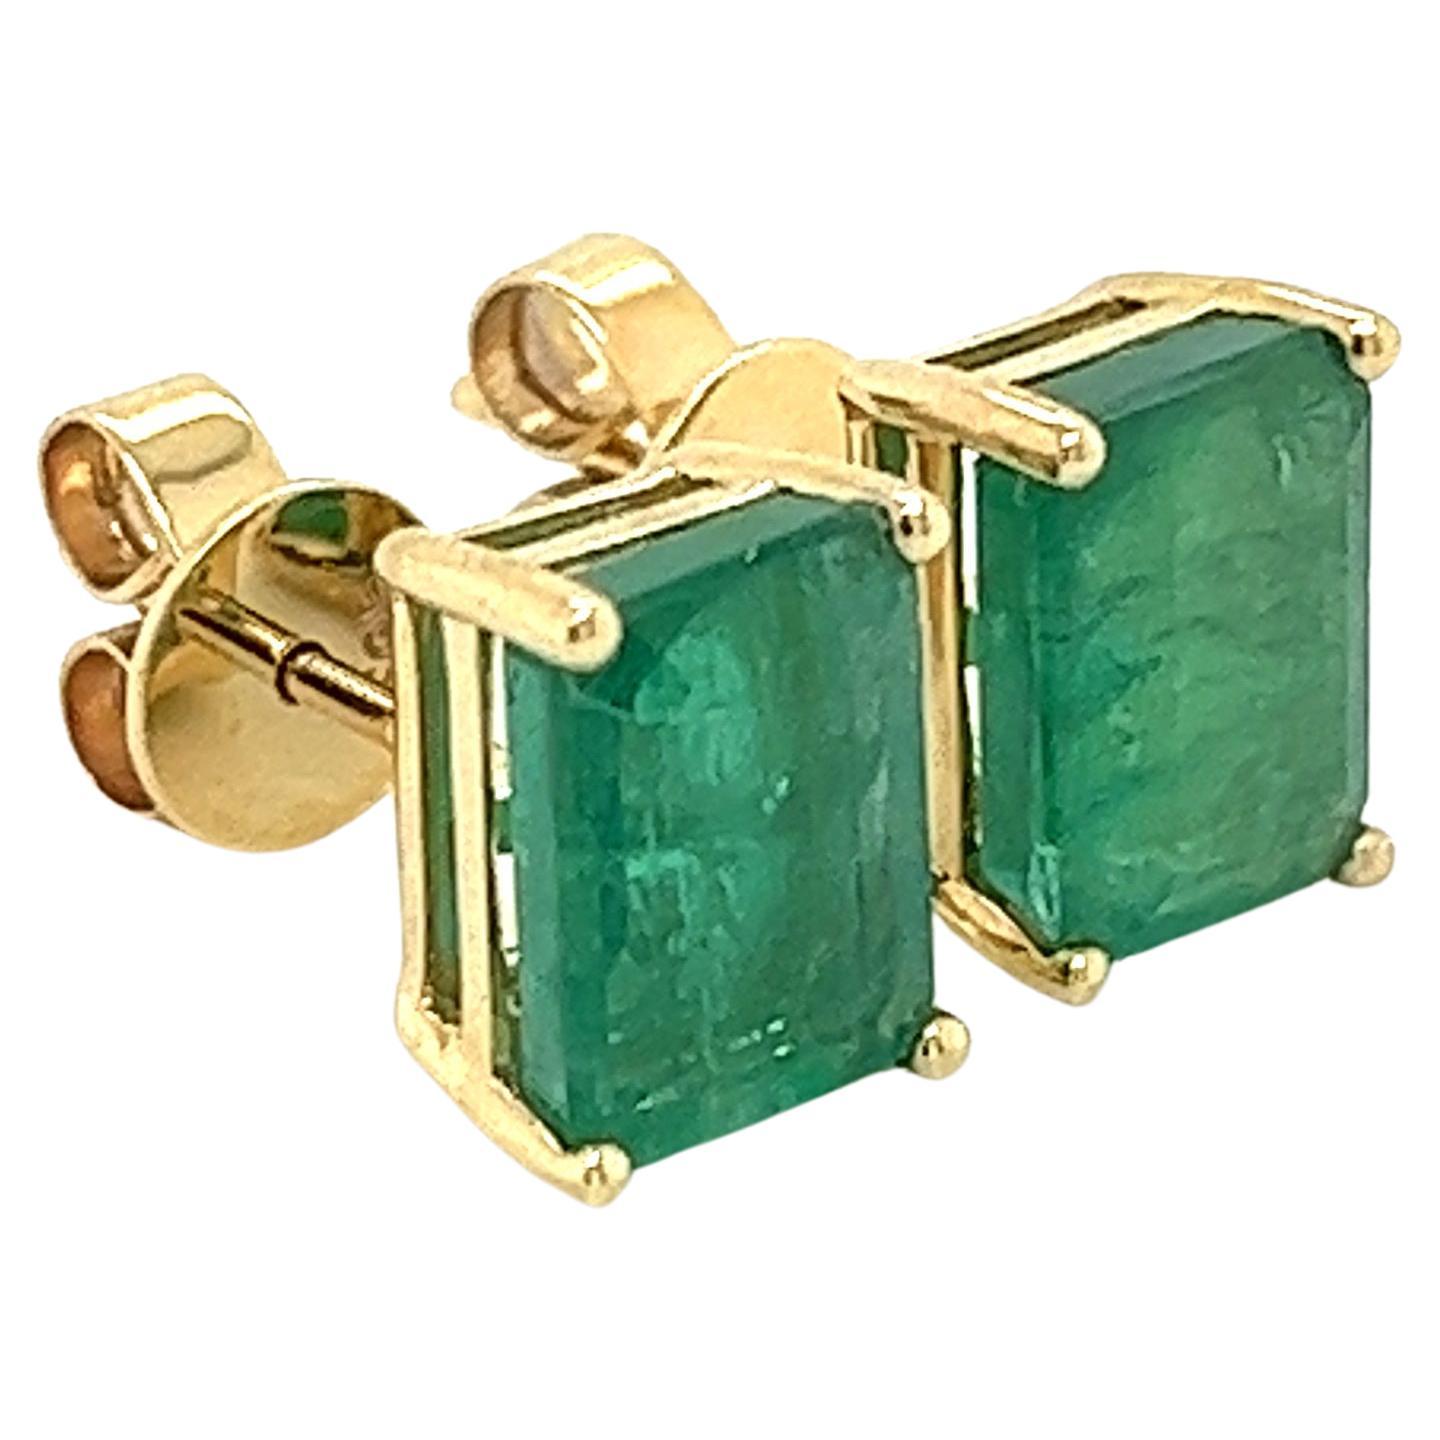 4.7 Carat Total Emerald Stud Earrings in 4-Prong 14k Solid Yellow Gold